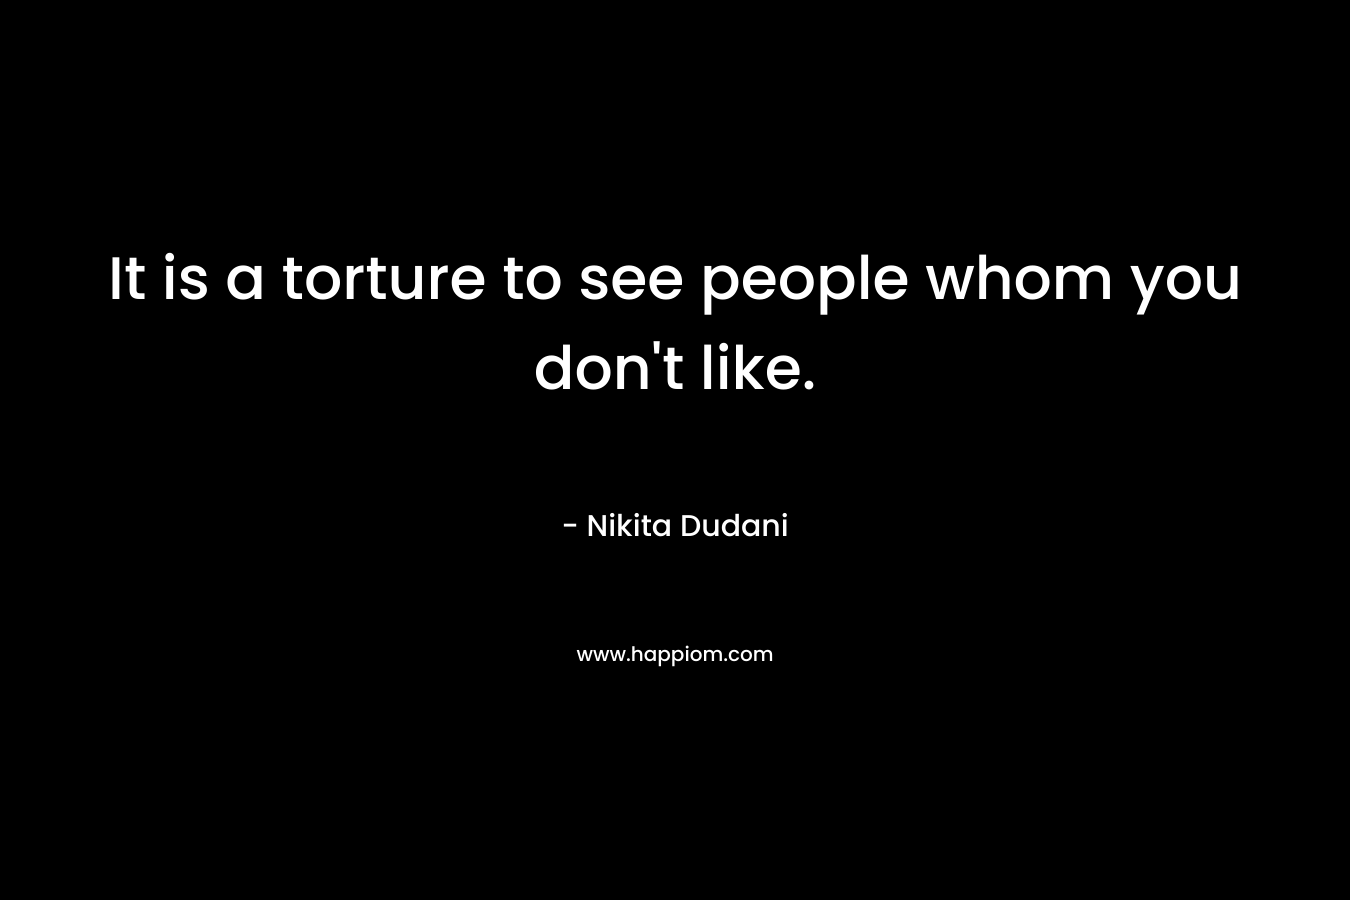 It is a torture to see people whom you don’t like. – Nikita Dudani